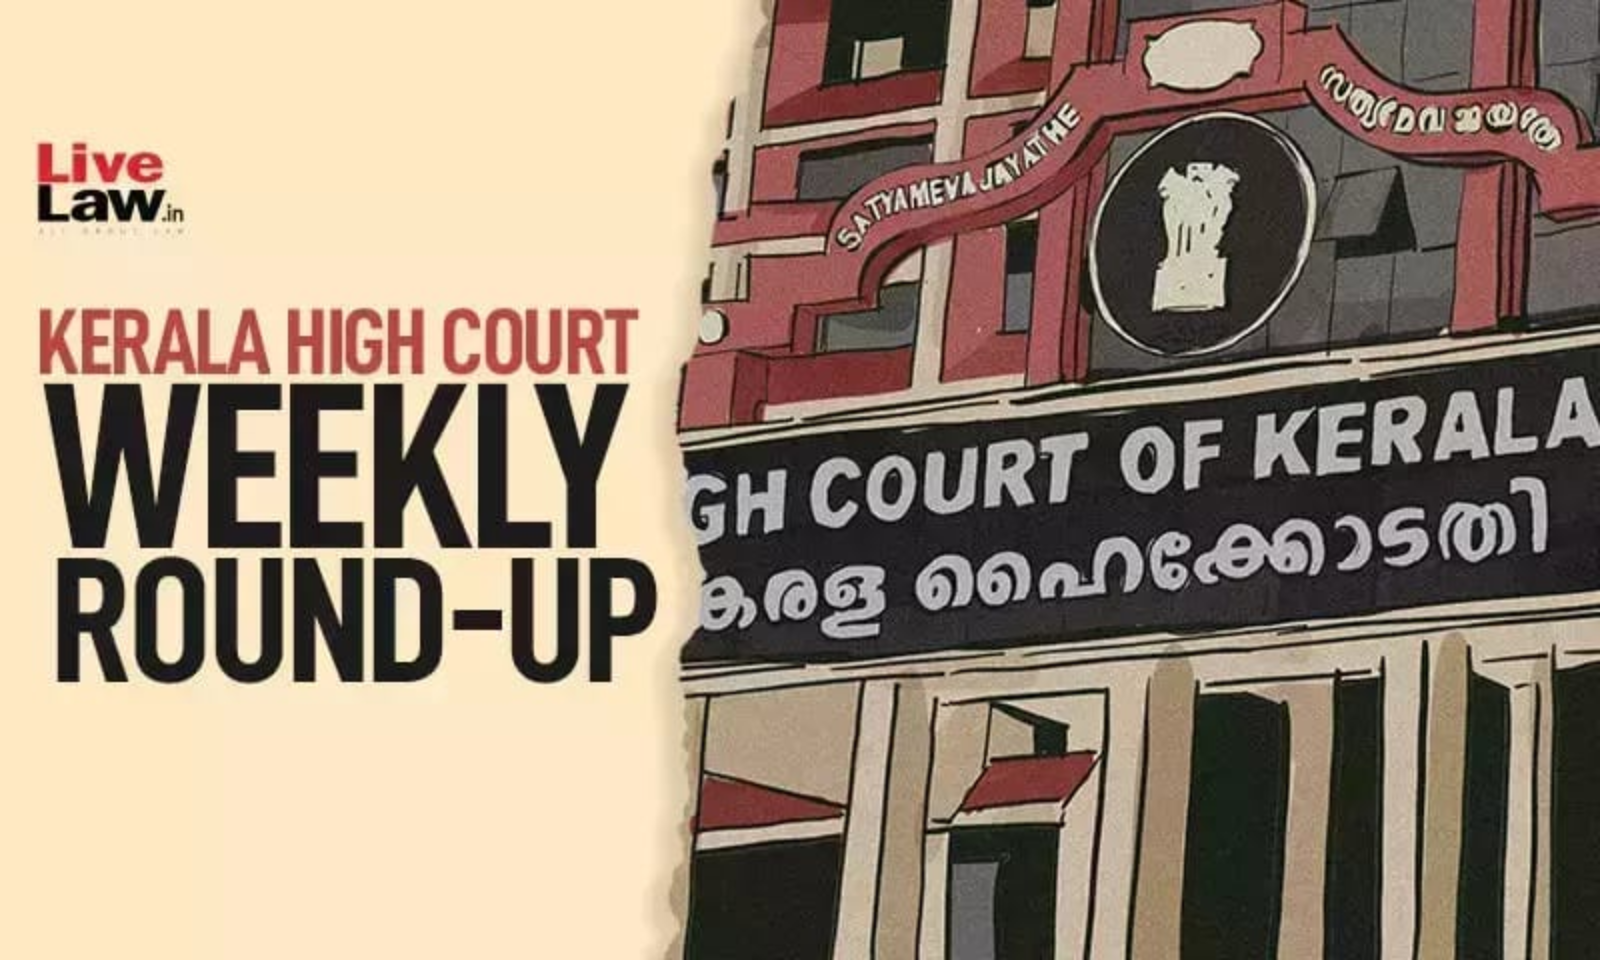 Sexcy Video 12 Ors Girl 15bars Boy Hd - Kerala High Court Weekly Round-Up: June 5 To June 11, 2023